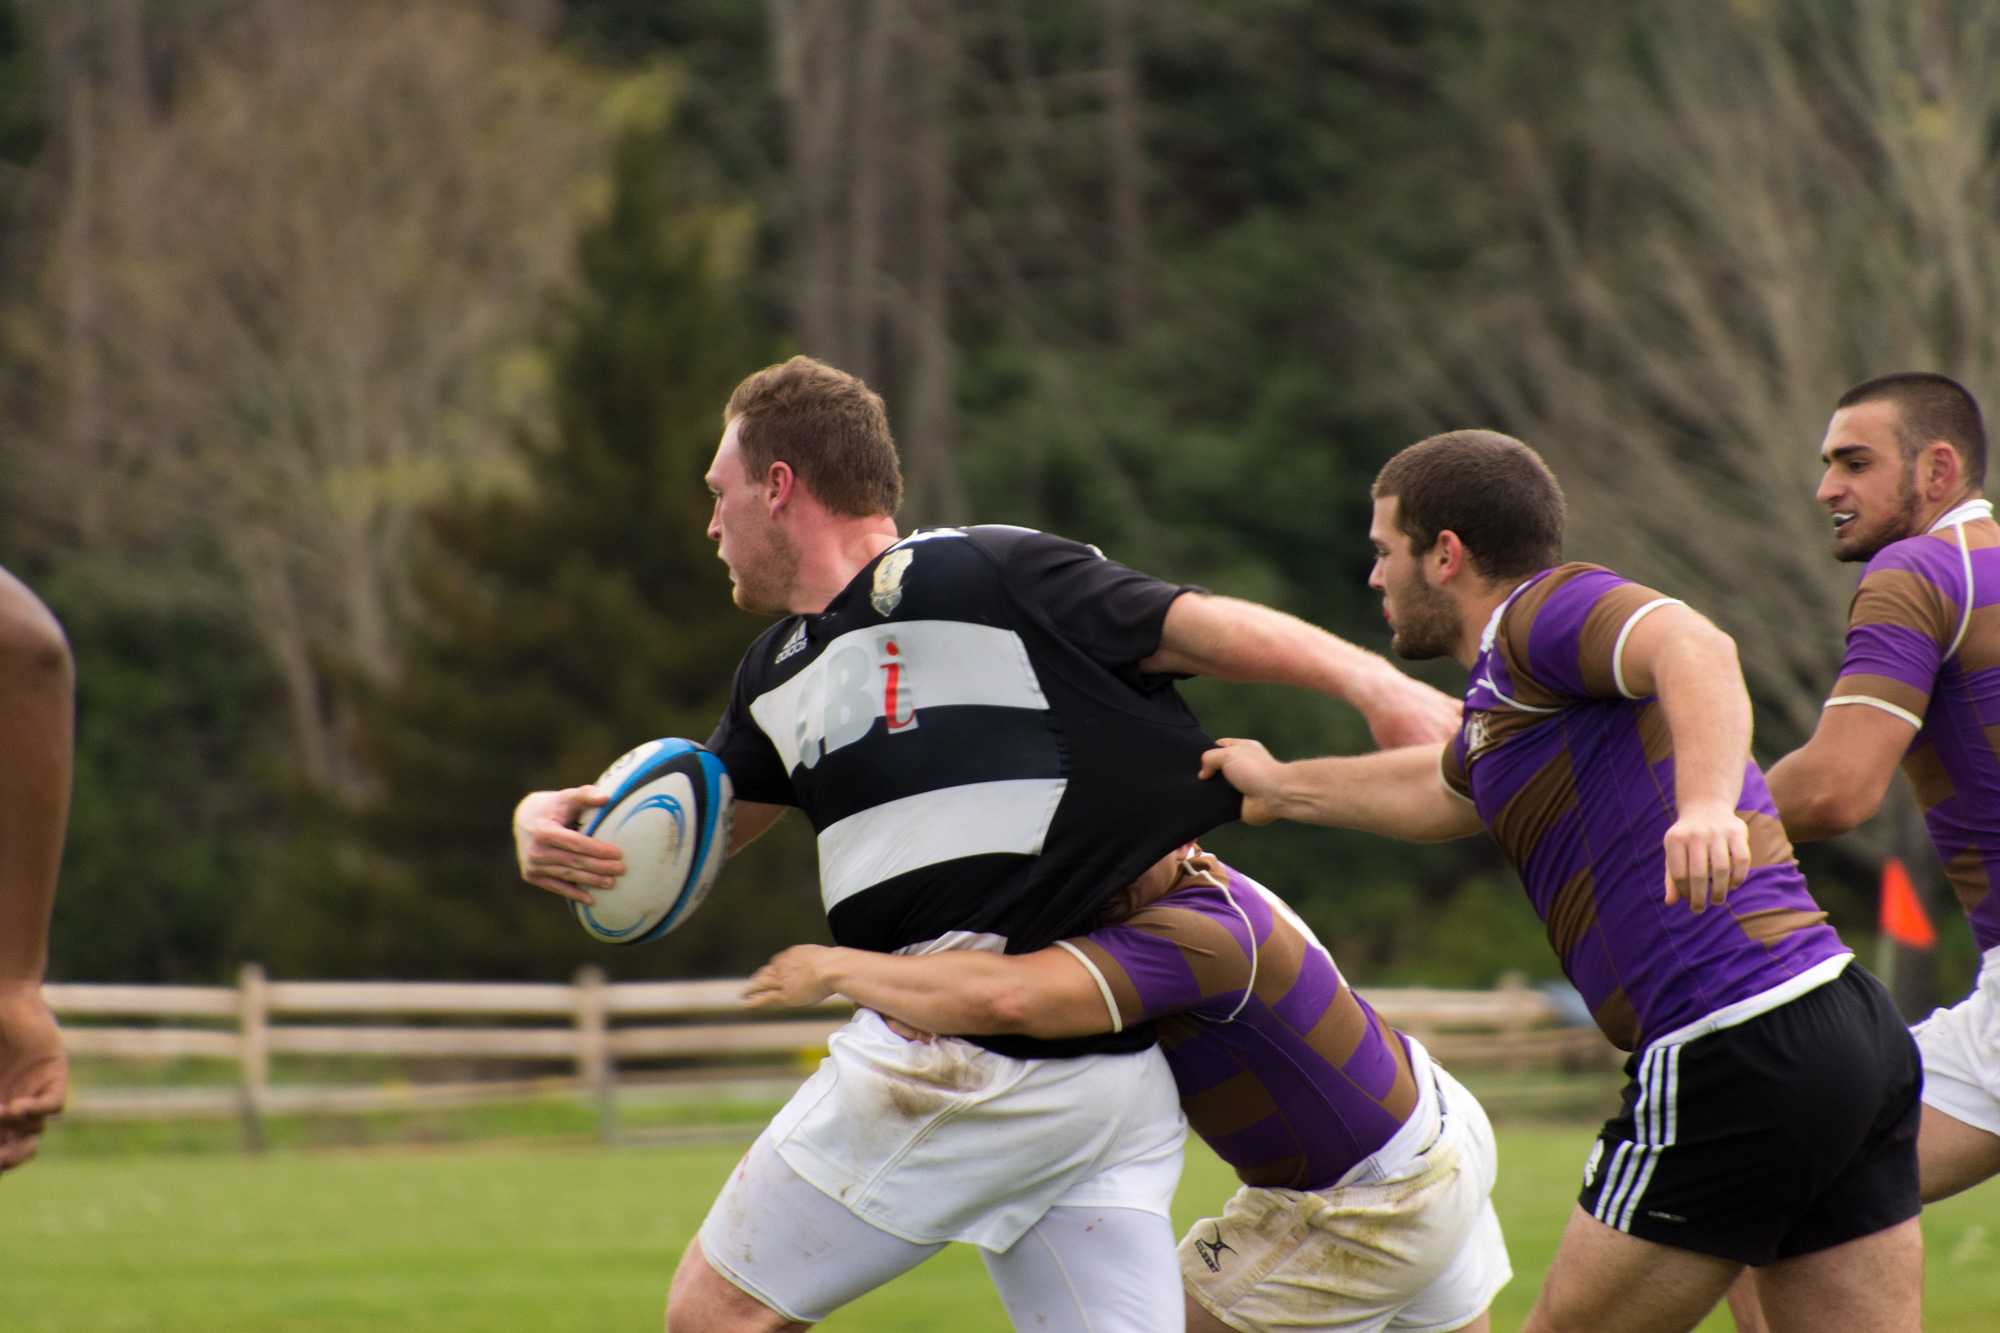 Senior prop Murphy Swancy attempts to run for a try against Western Carolina University on Saturday at State Farm. A try is the primary way of scoring and is worth five points. Photo by Dallas Linger.